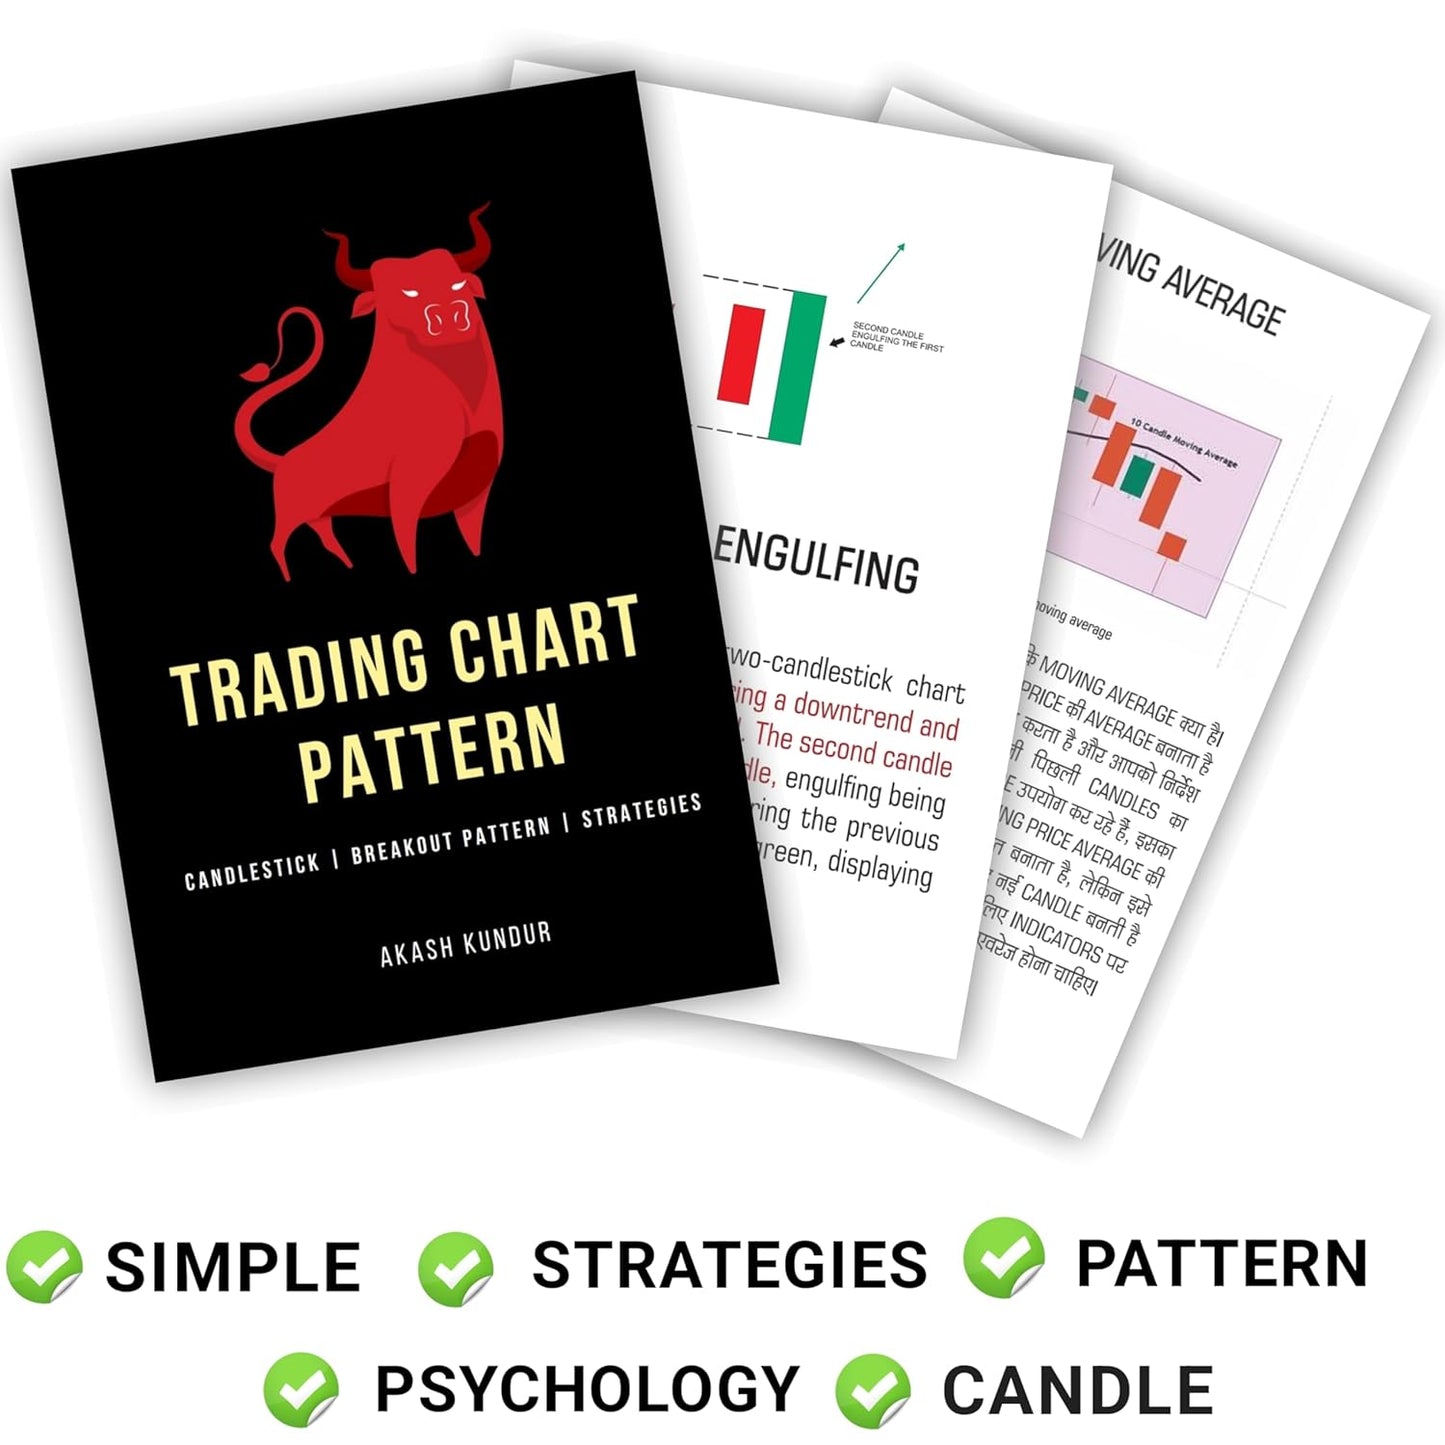 Trading Chart Breakout Pattern & Candlestick Pattern Pocket Study For Beginners